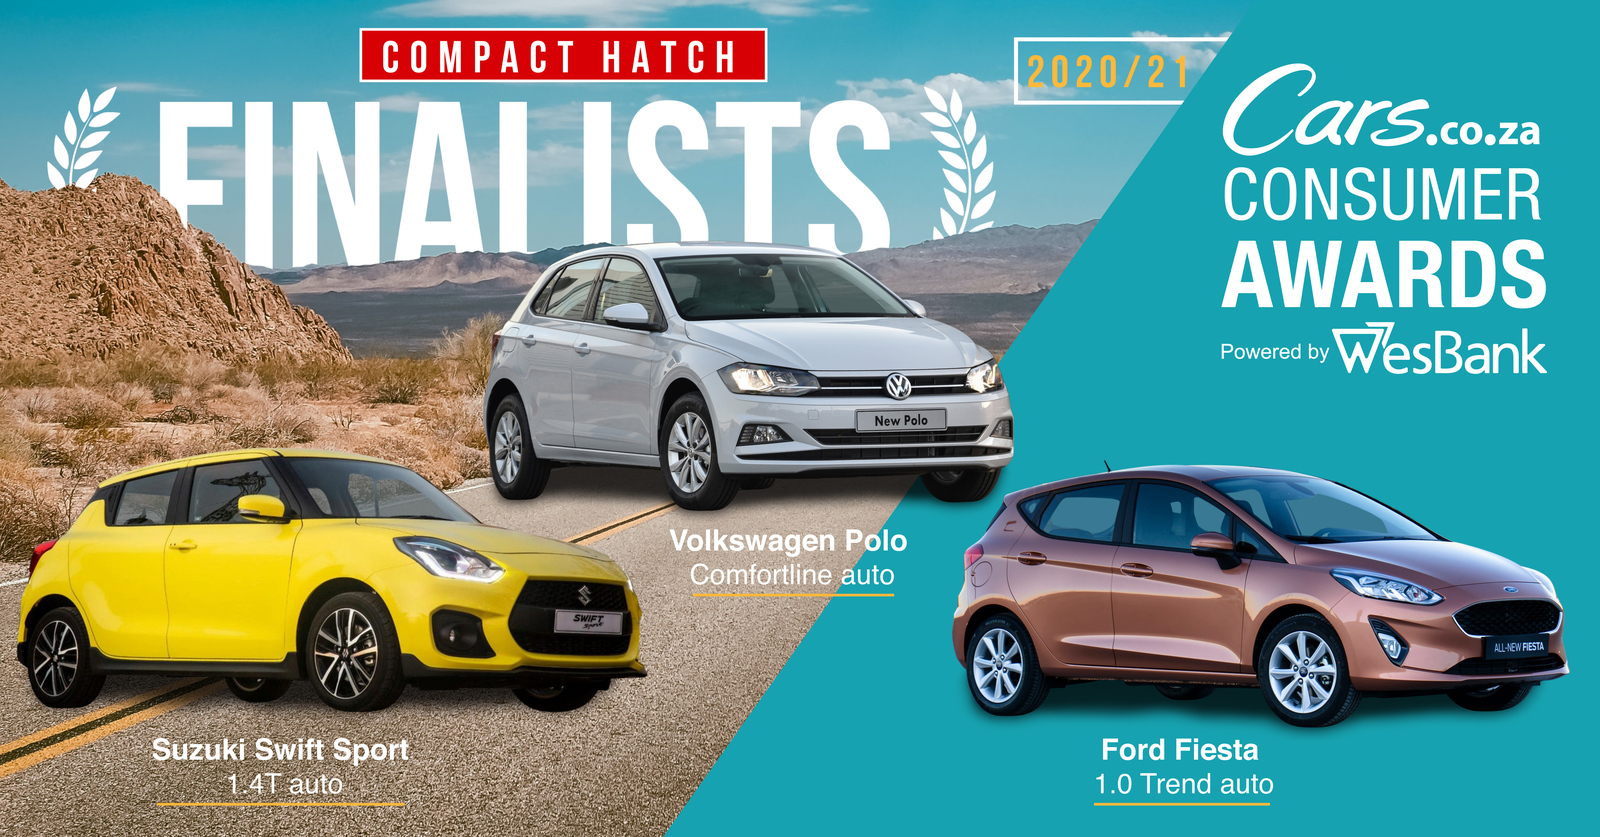 Carsawards Finalists Compact Hatch 01